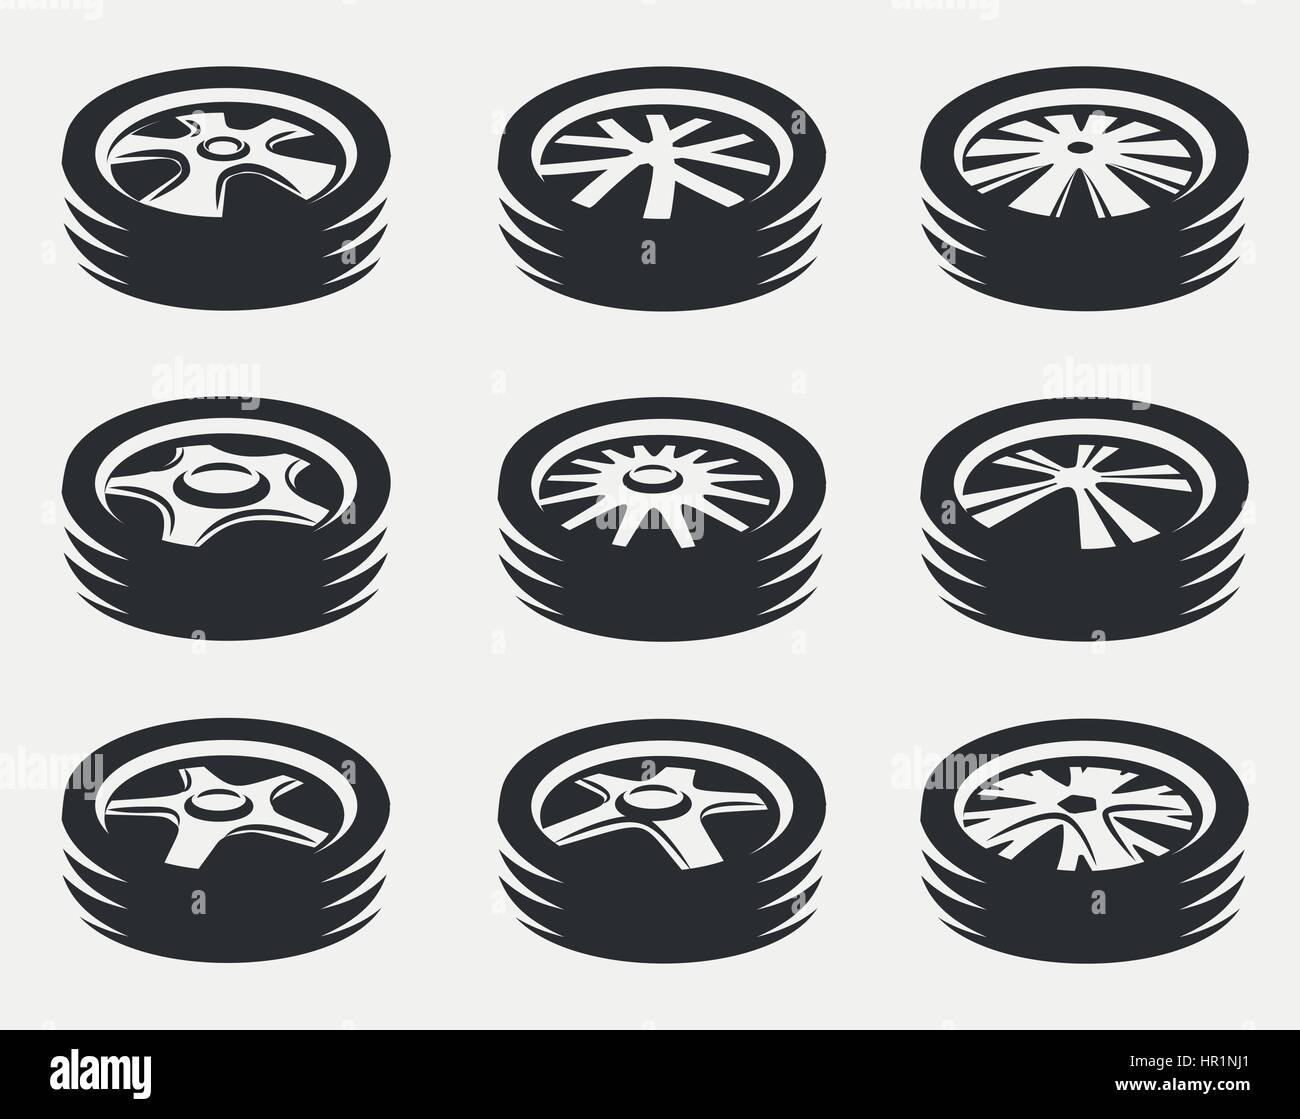 Isolated black and white color alloy wheels logo collection, car elements logotype set vector illustration. Stock Vector